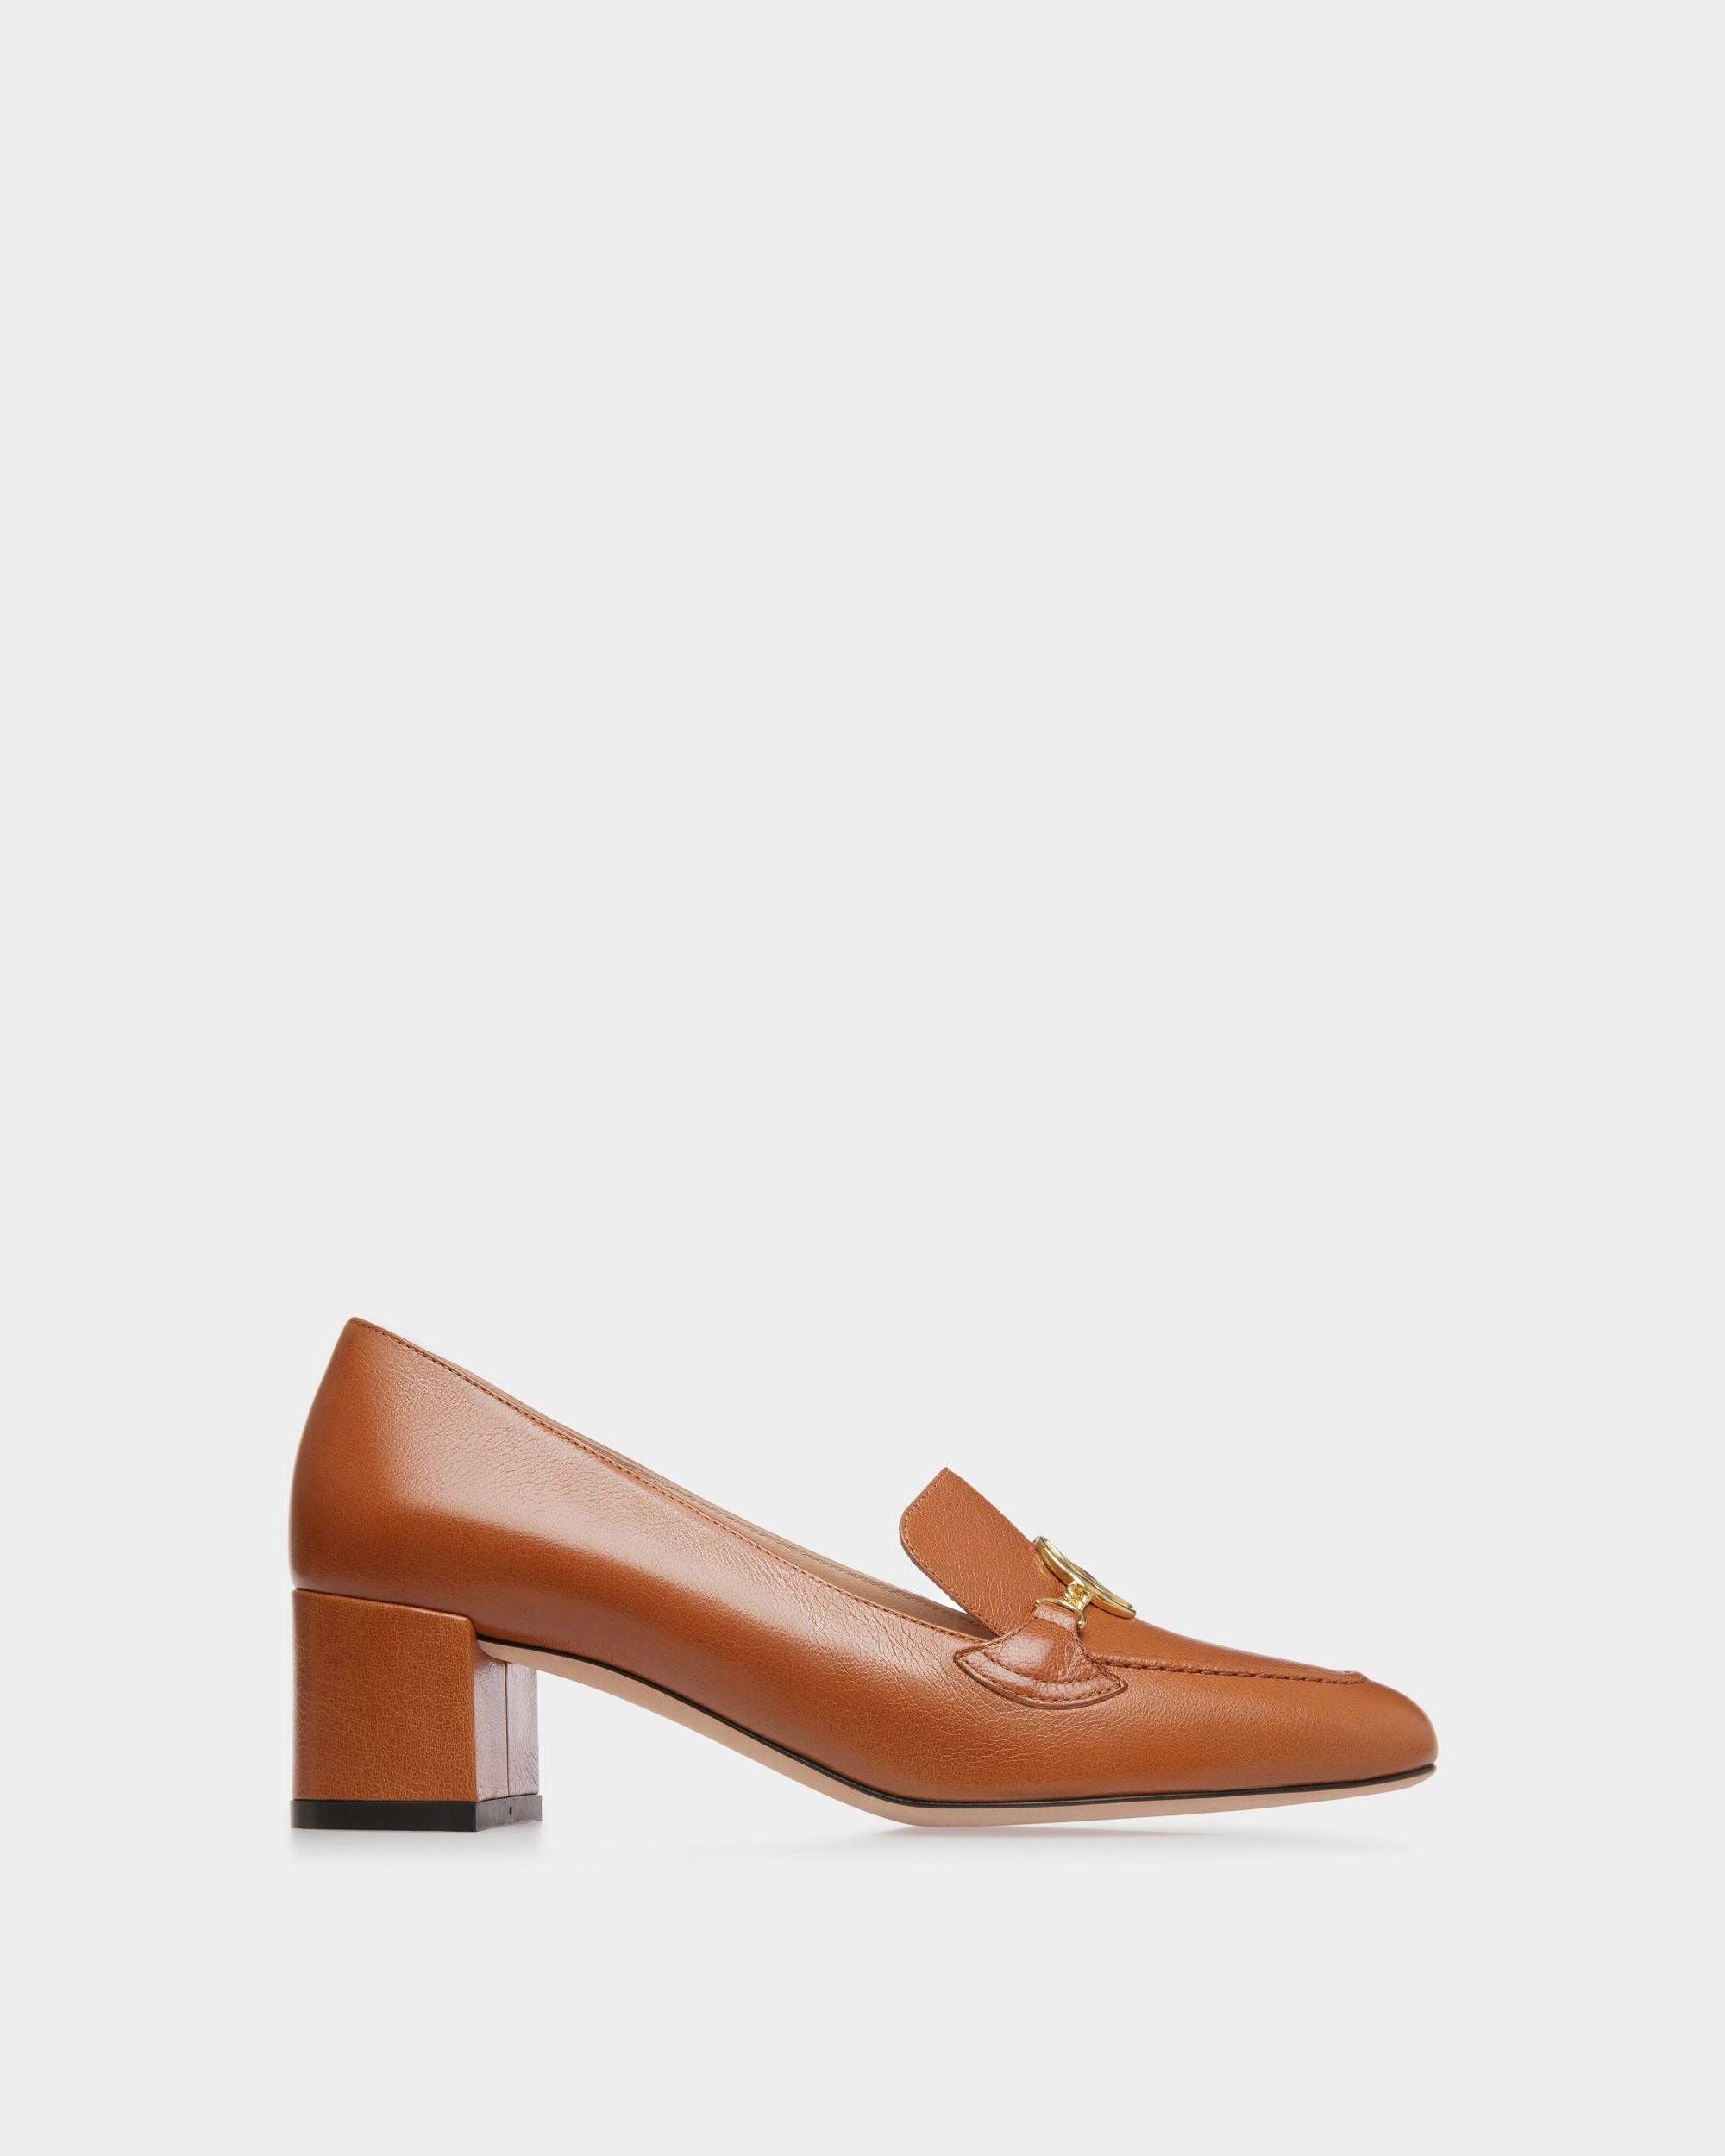 Obrien | Women's Pumps | Brown Leather | Bally | Still Life Side